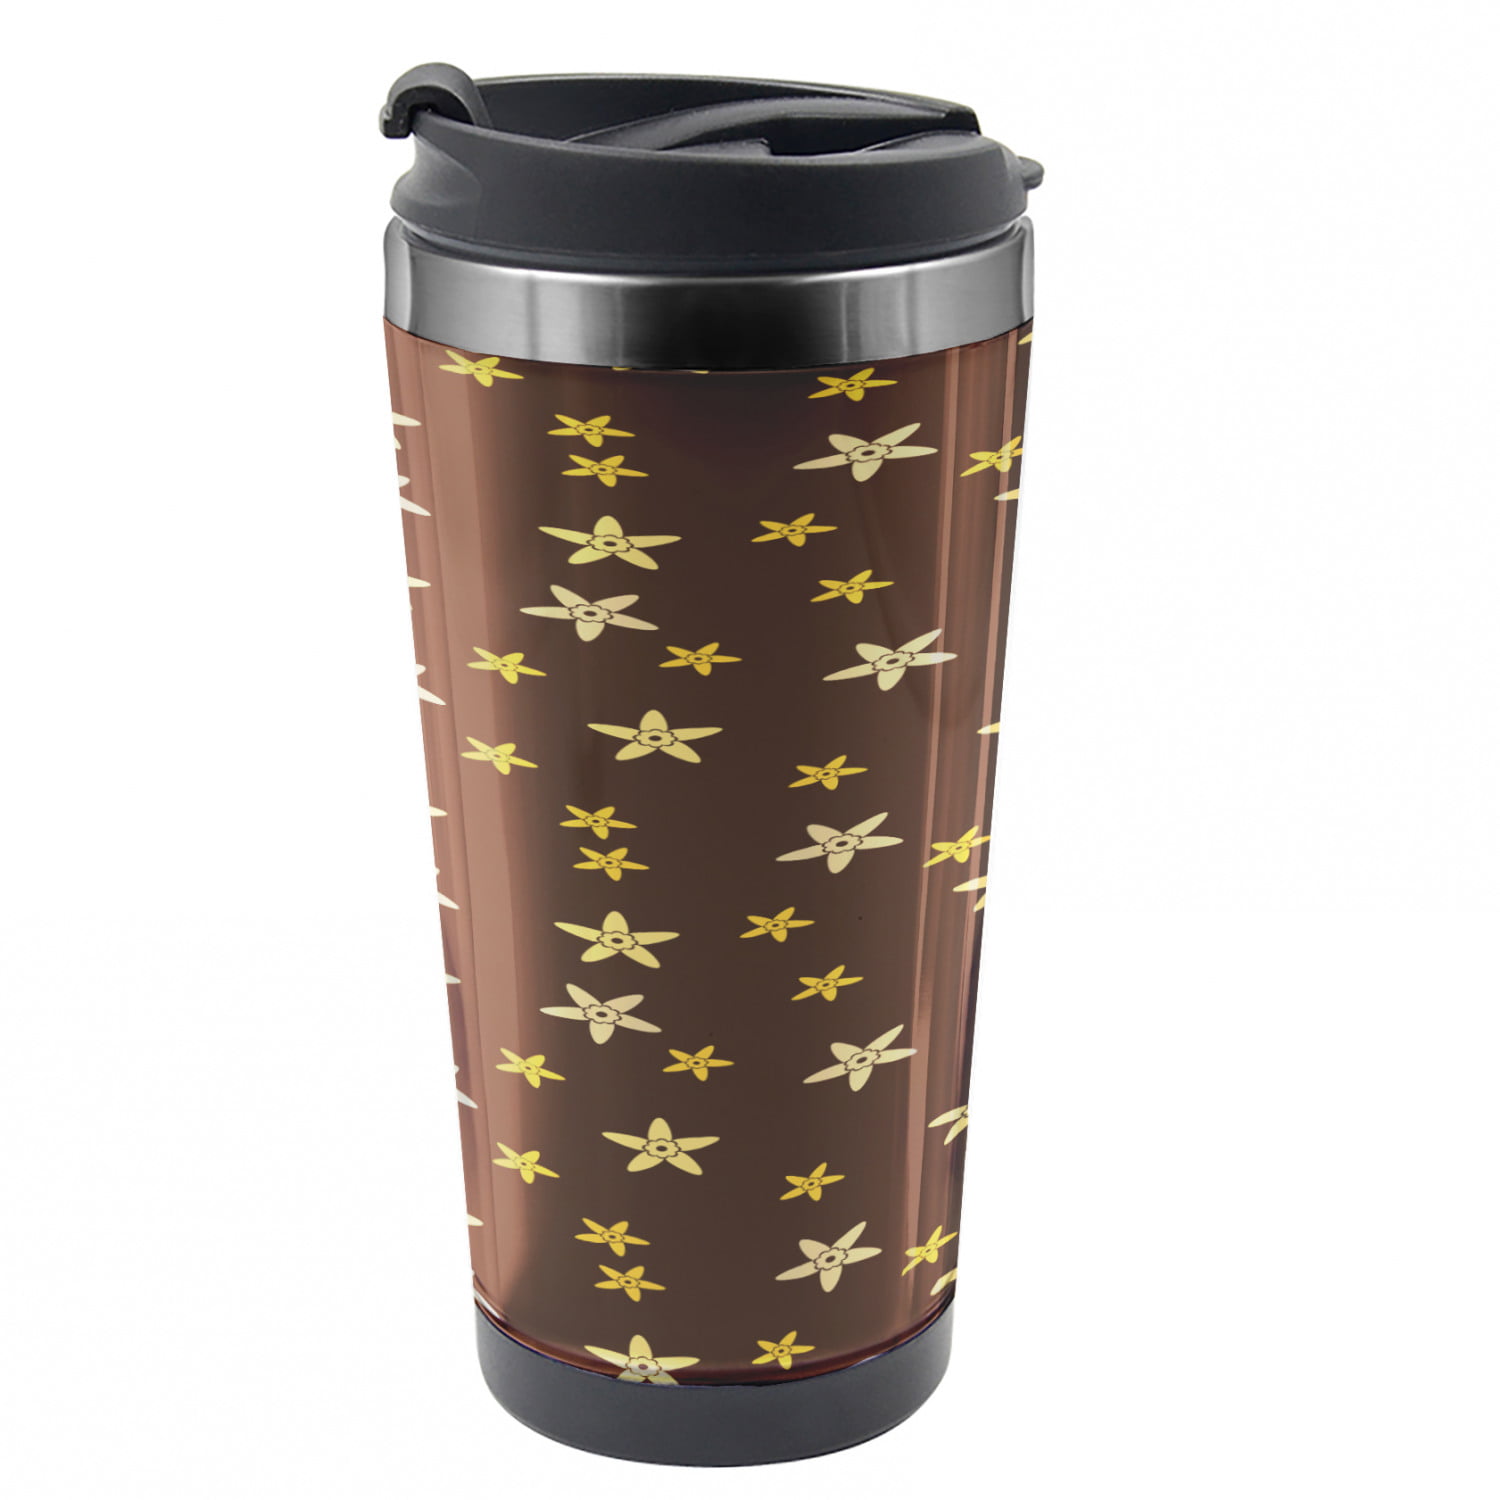 Floral Travel Mug, Yellow Tones Flowers, Steel Thermal Cup